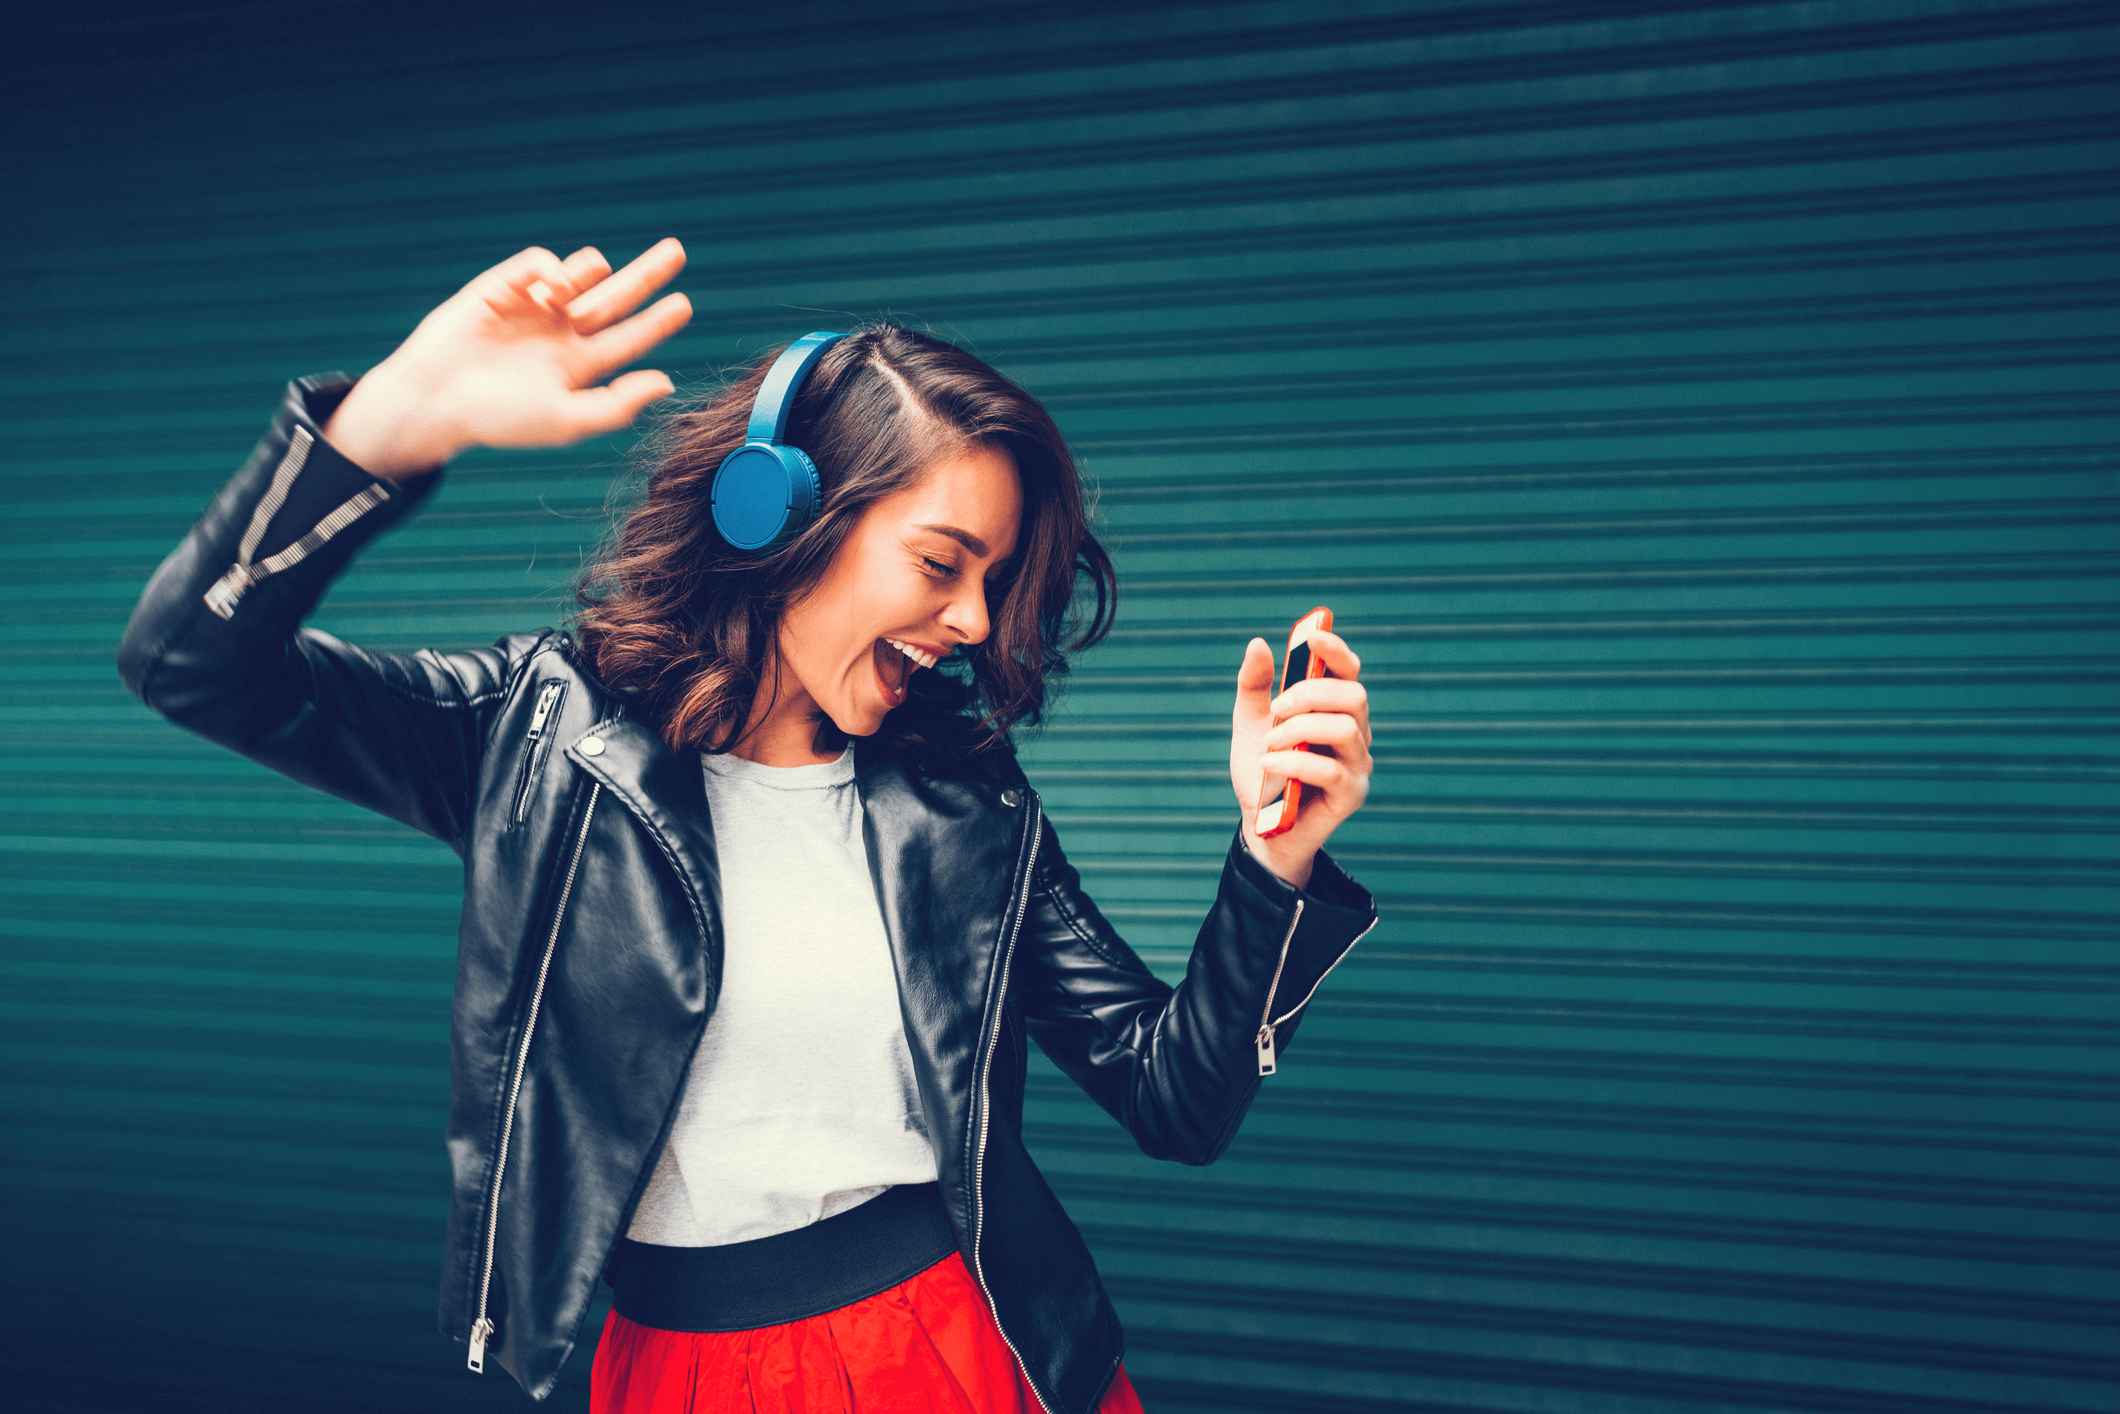 How Music Can Make Your Workday More Enjoyable